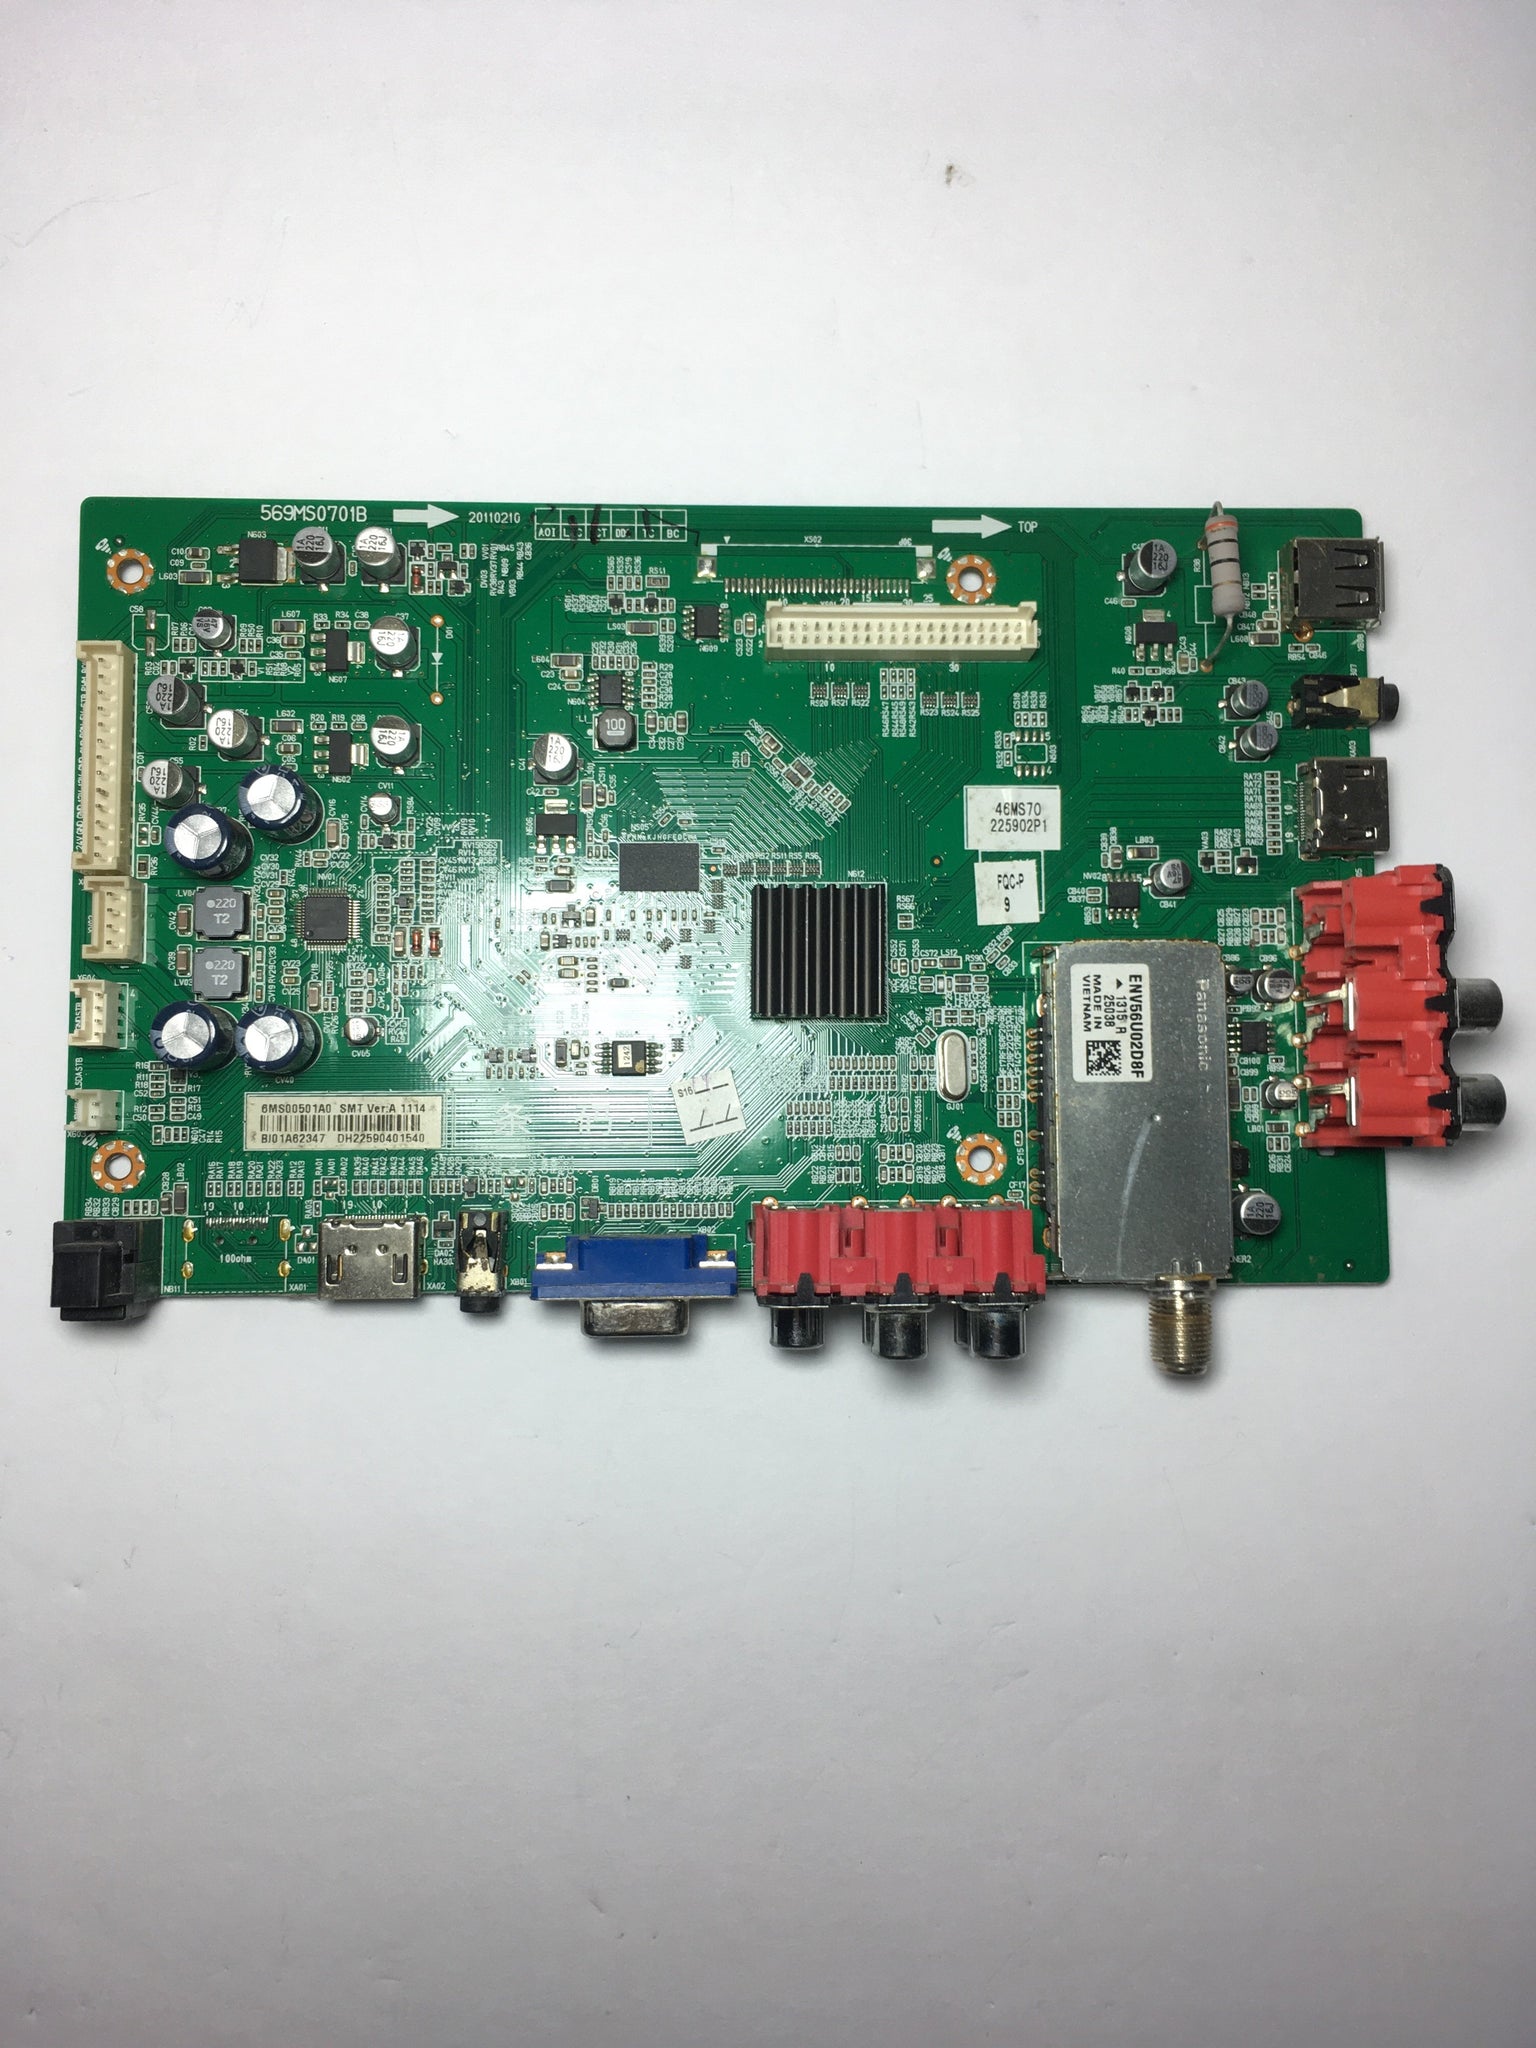 Dynex 6MS00501A0 (569MS0701B) Main Board for DX-46L261A12